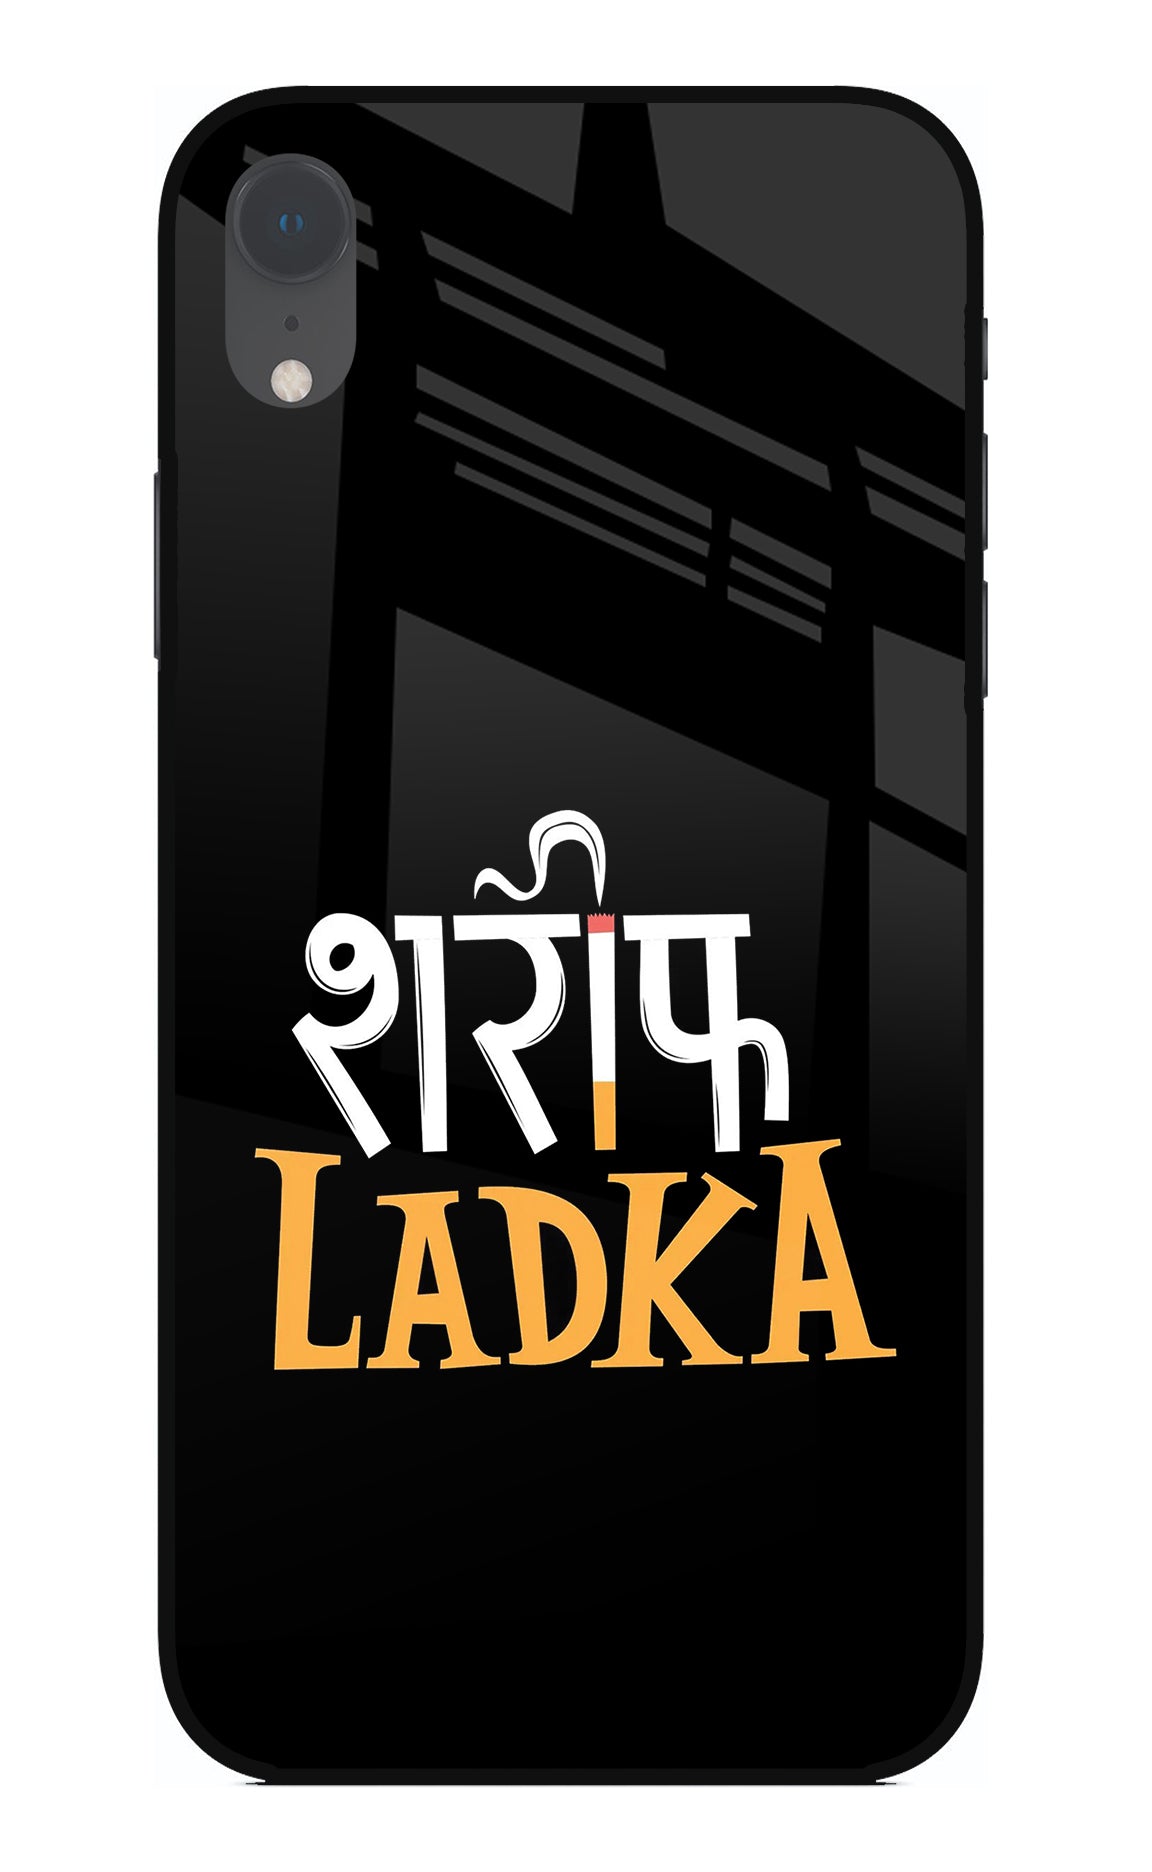 Shareef Ladka iPhone XR Back Cover